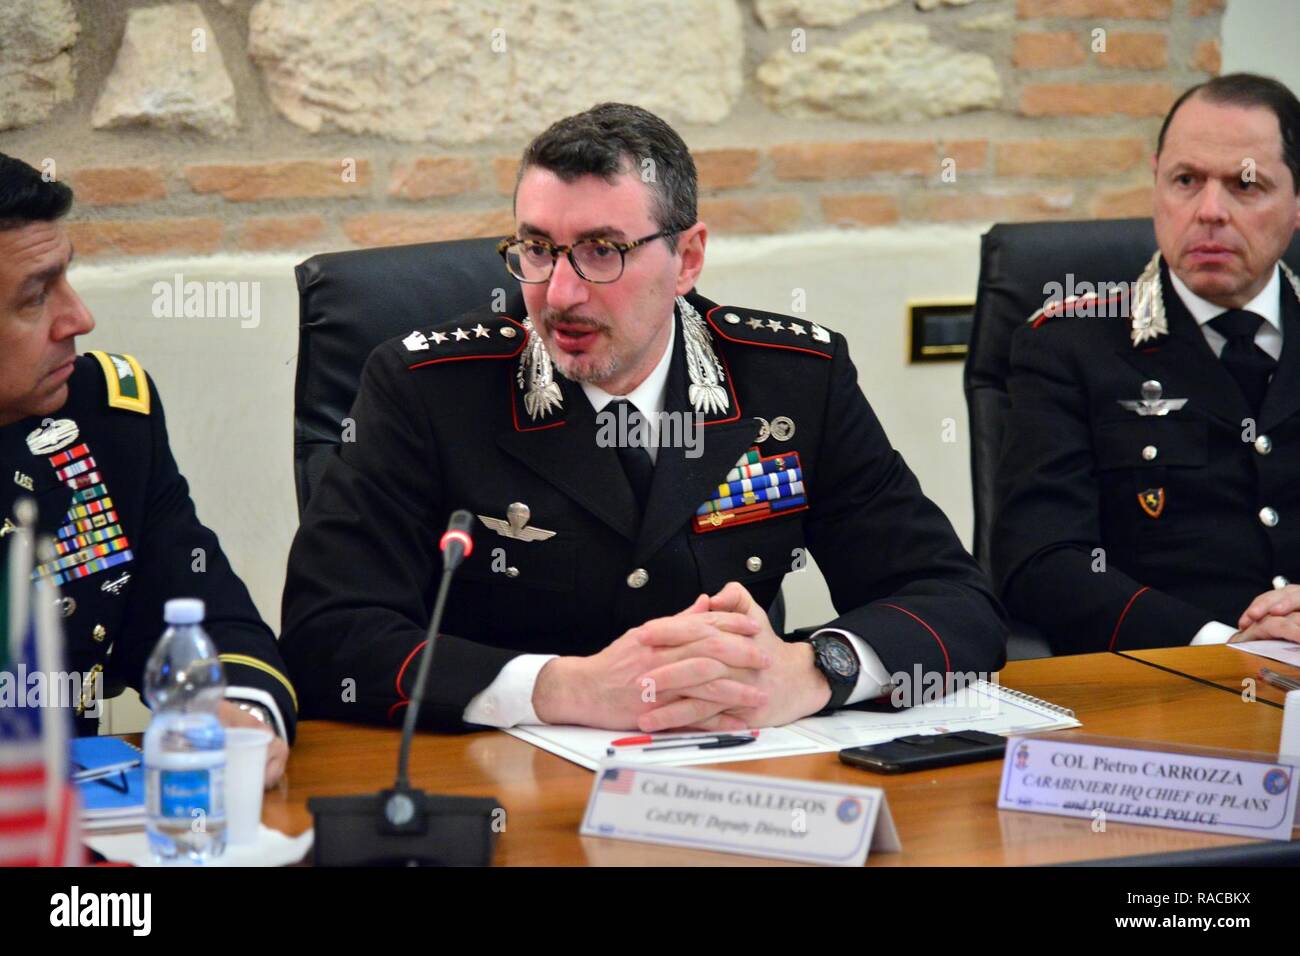 Col. Pietro Carrozza, Center of Excellence for Stability Police Units (CoESPU), Carabinieri HQ Chief of plans and Military Police, address during visit of Lt. Gen. Charles D. Luckey, Commanding General U.S. Army Reserve Command, at Center of Excellence for Stability Police Units (CoESPU) Vicenza, Italy, Jan. 20, 2017. Stock Photo